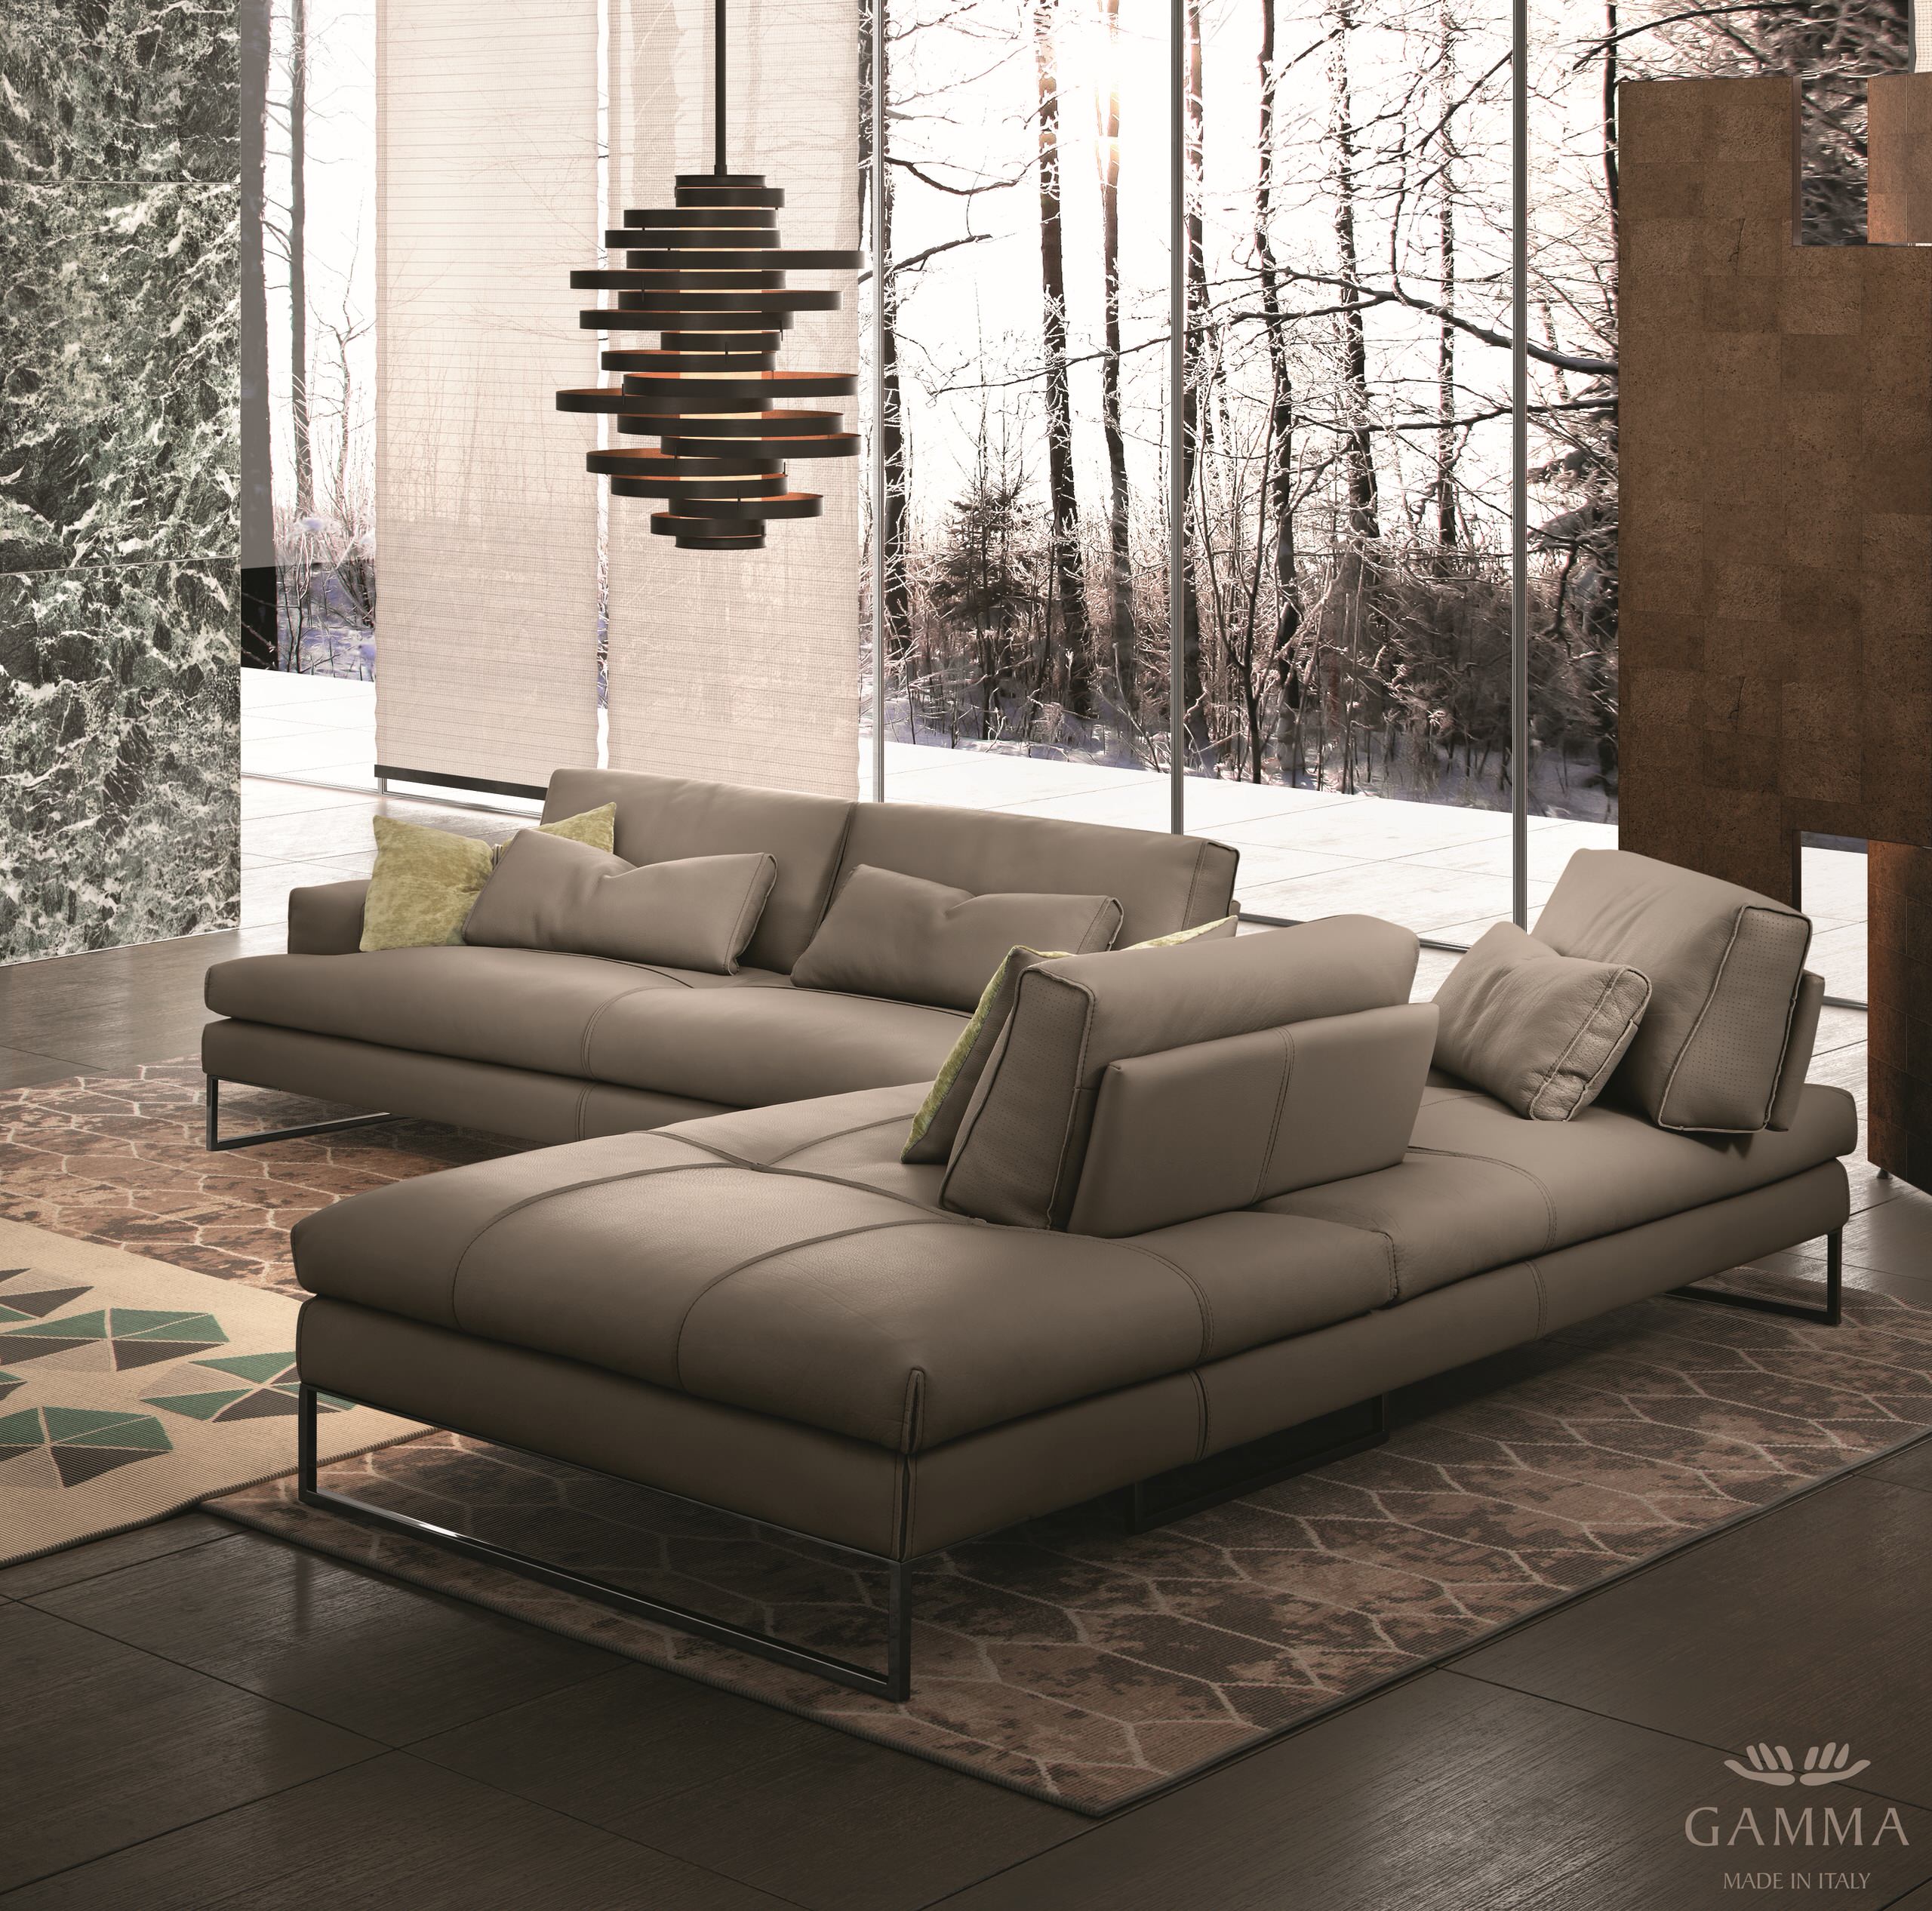 Sunset Sectional by Gamma Arredamenti - Contemporary - Family Room - DC  Metro - by RoomService 360 | Houzz